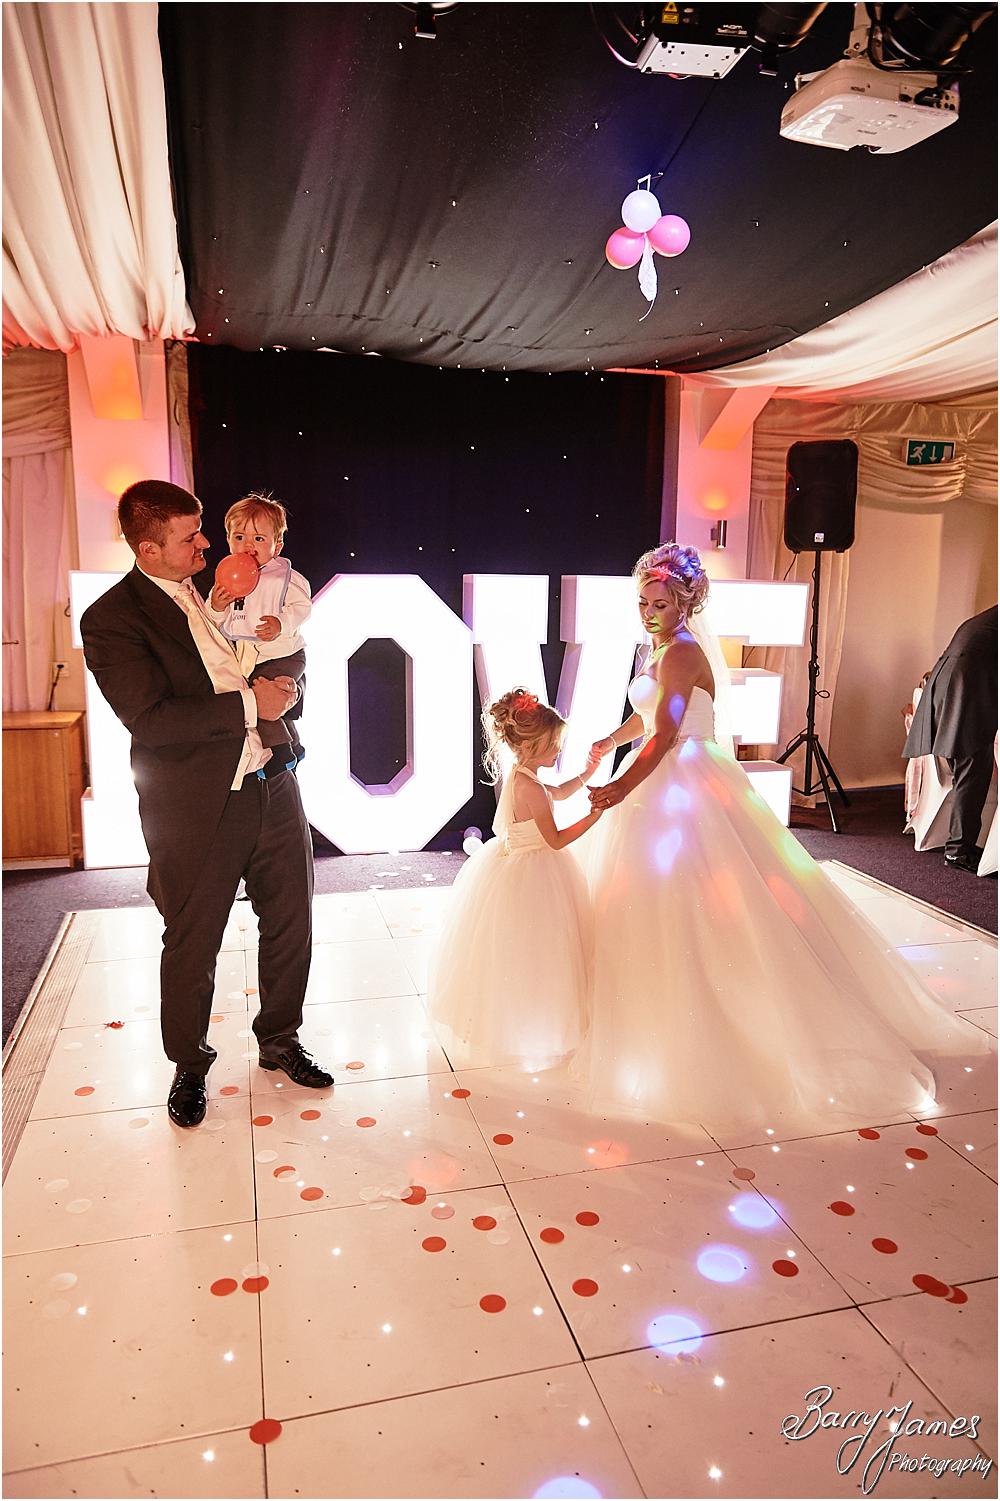 Creative conclusion to the wedding story at Calderfields in Walsall by Calderfields Wedding Photographer Barry James